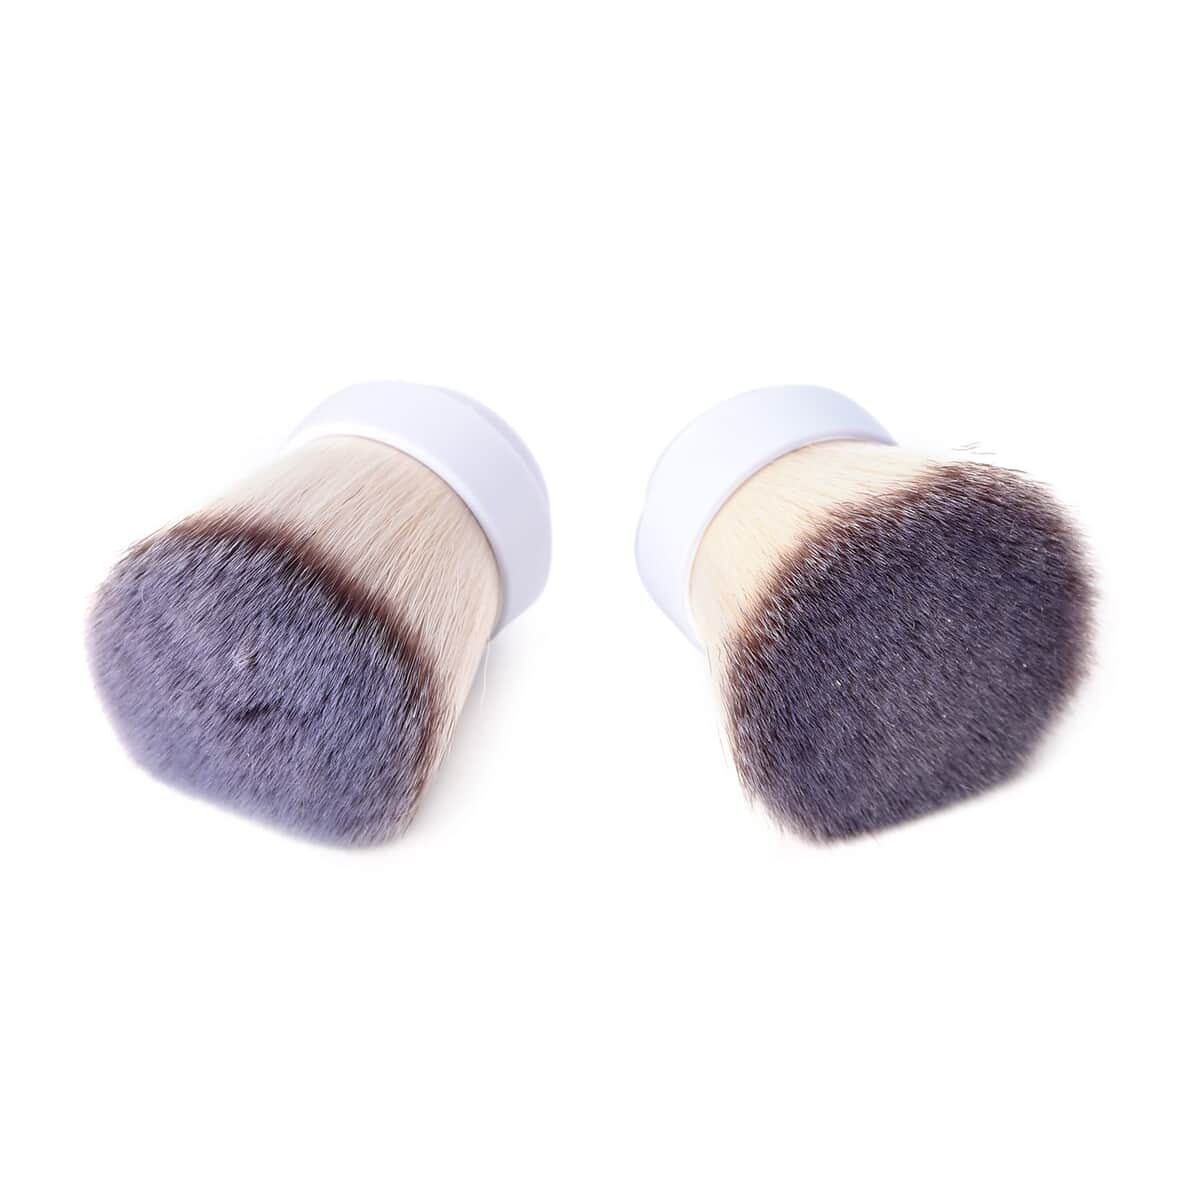 Power Spin Makeup Brush with 2 Interchangeable Brush Heads image number 5